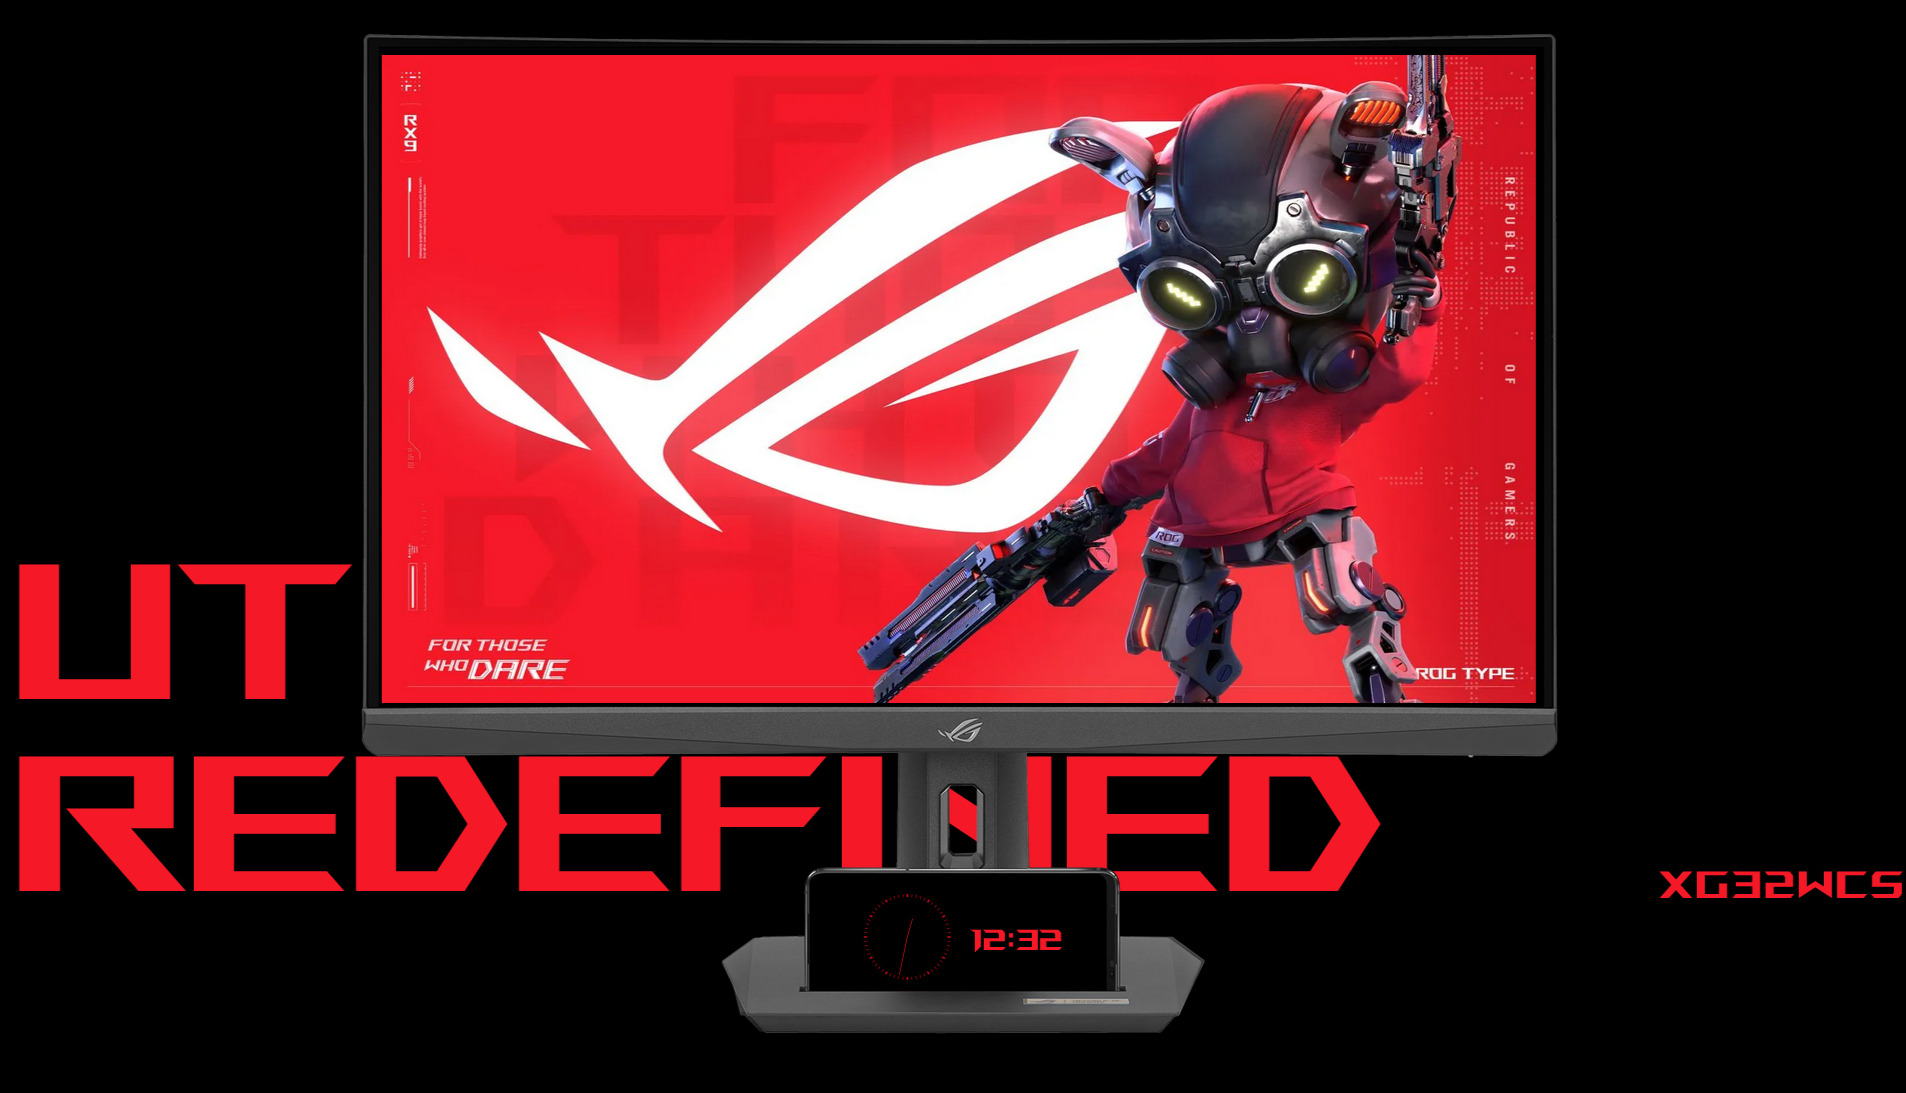 A large marketing image providing additional information about the product ASUS ROG Strix XG32WCS 32" Curved 1440p 180Hz Fast VA Monitor - Additional alt info not provided